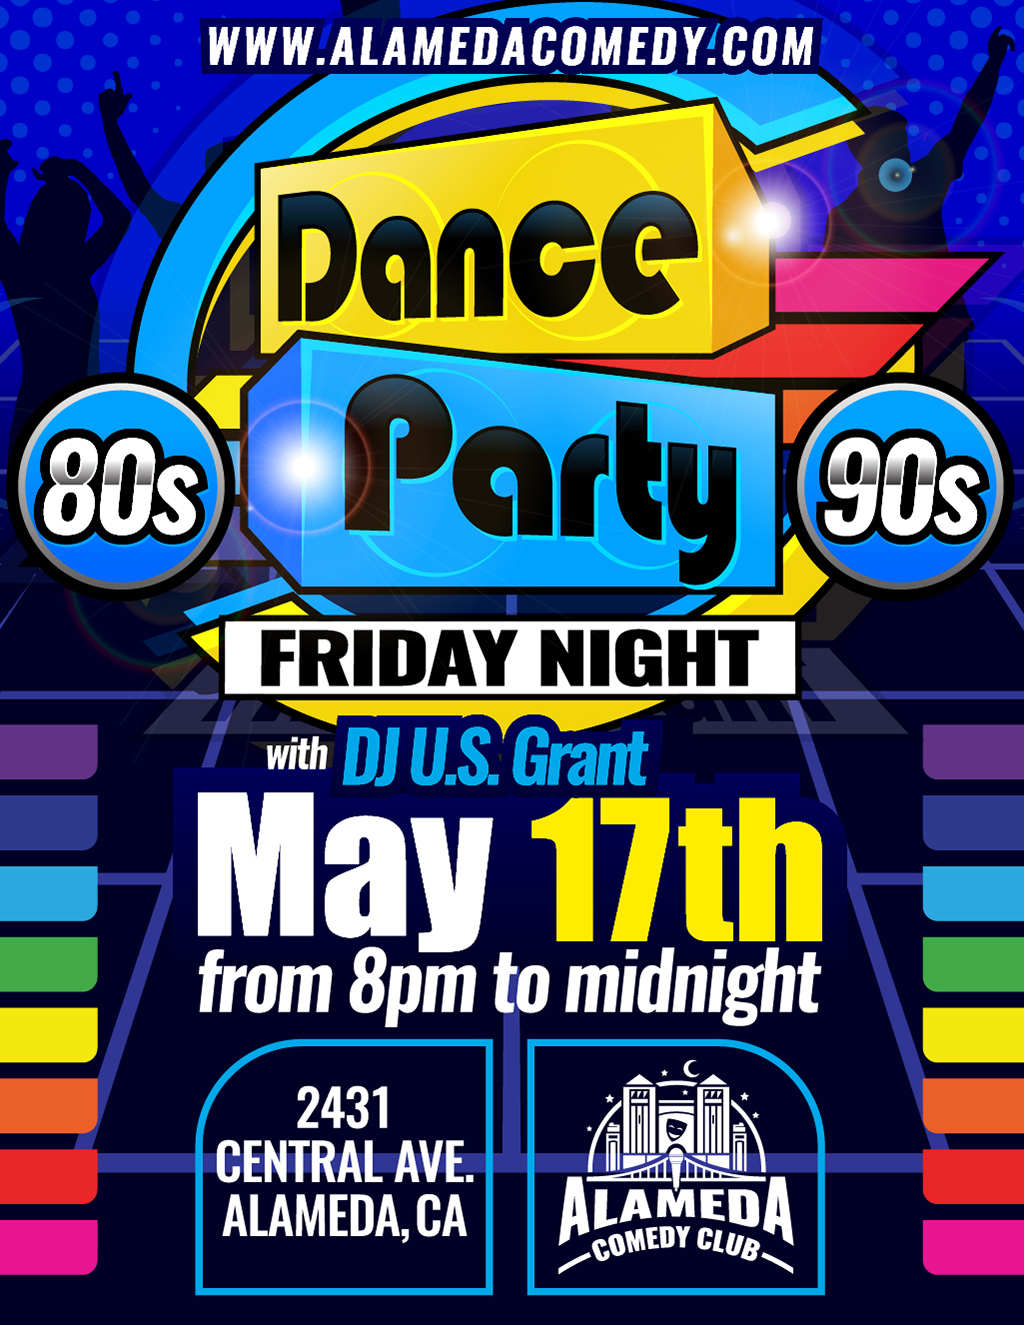 Alameda Comedy Club Join Us for an 80s and 90s Dance Party at Alameda Comedy Club  promotion flier on Digifli com